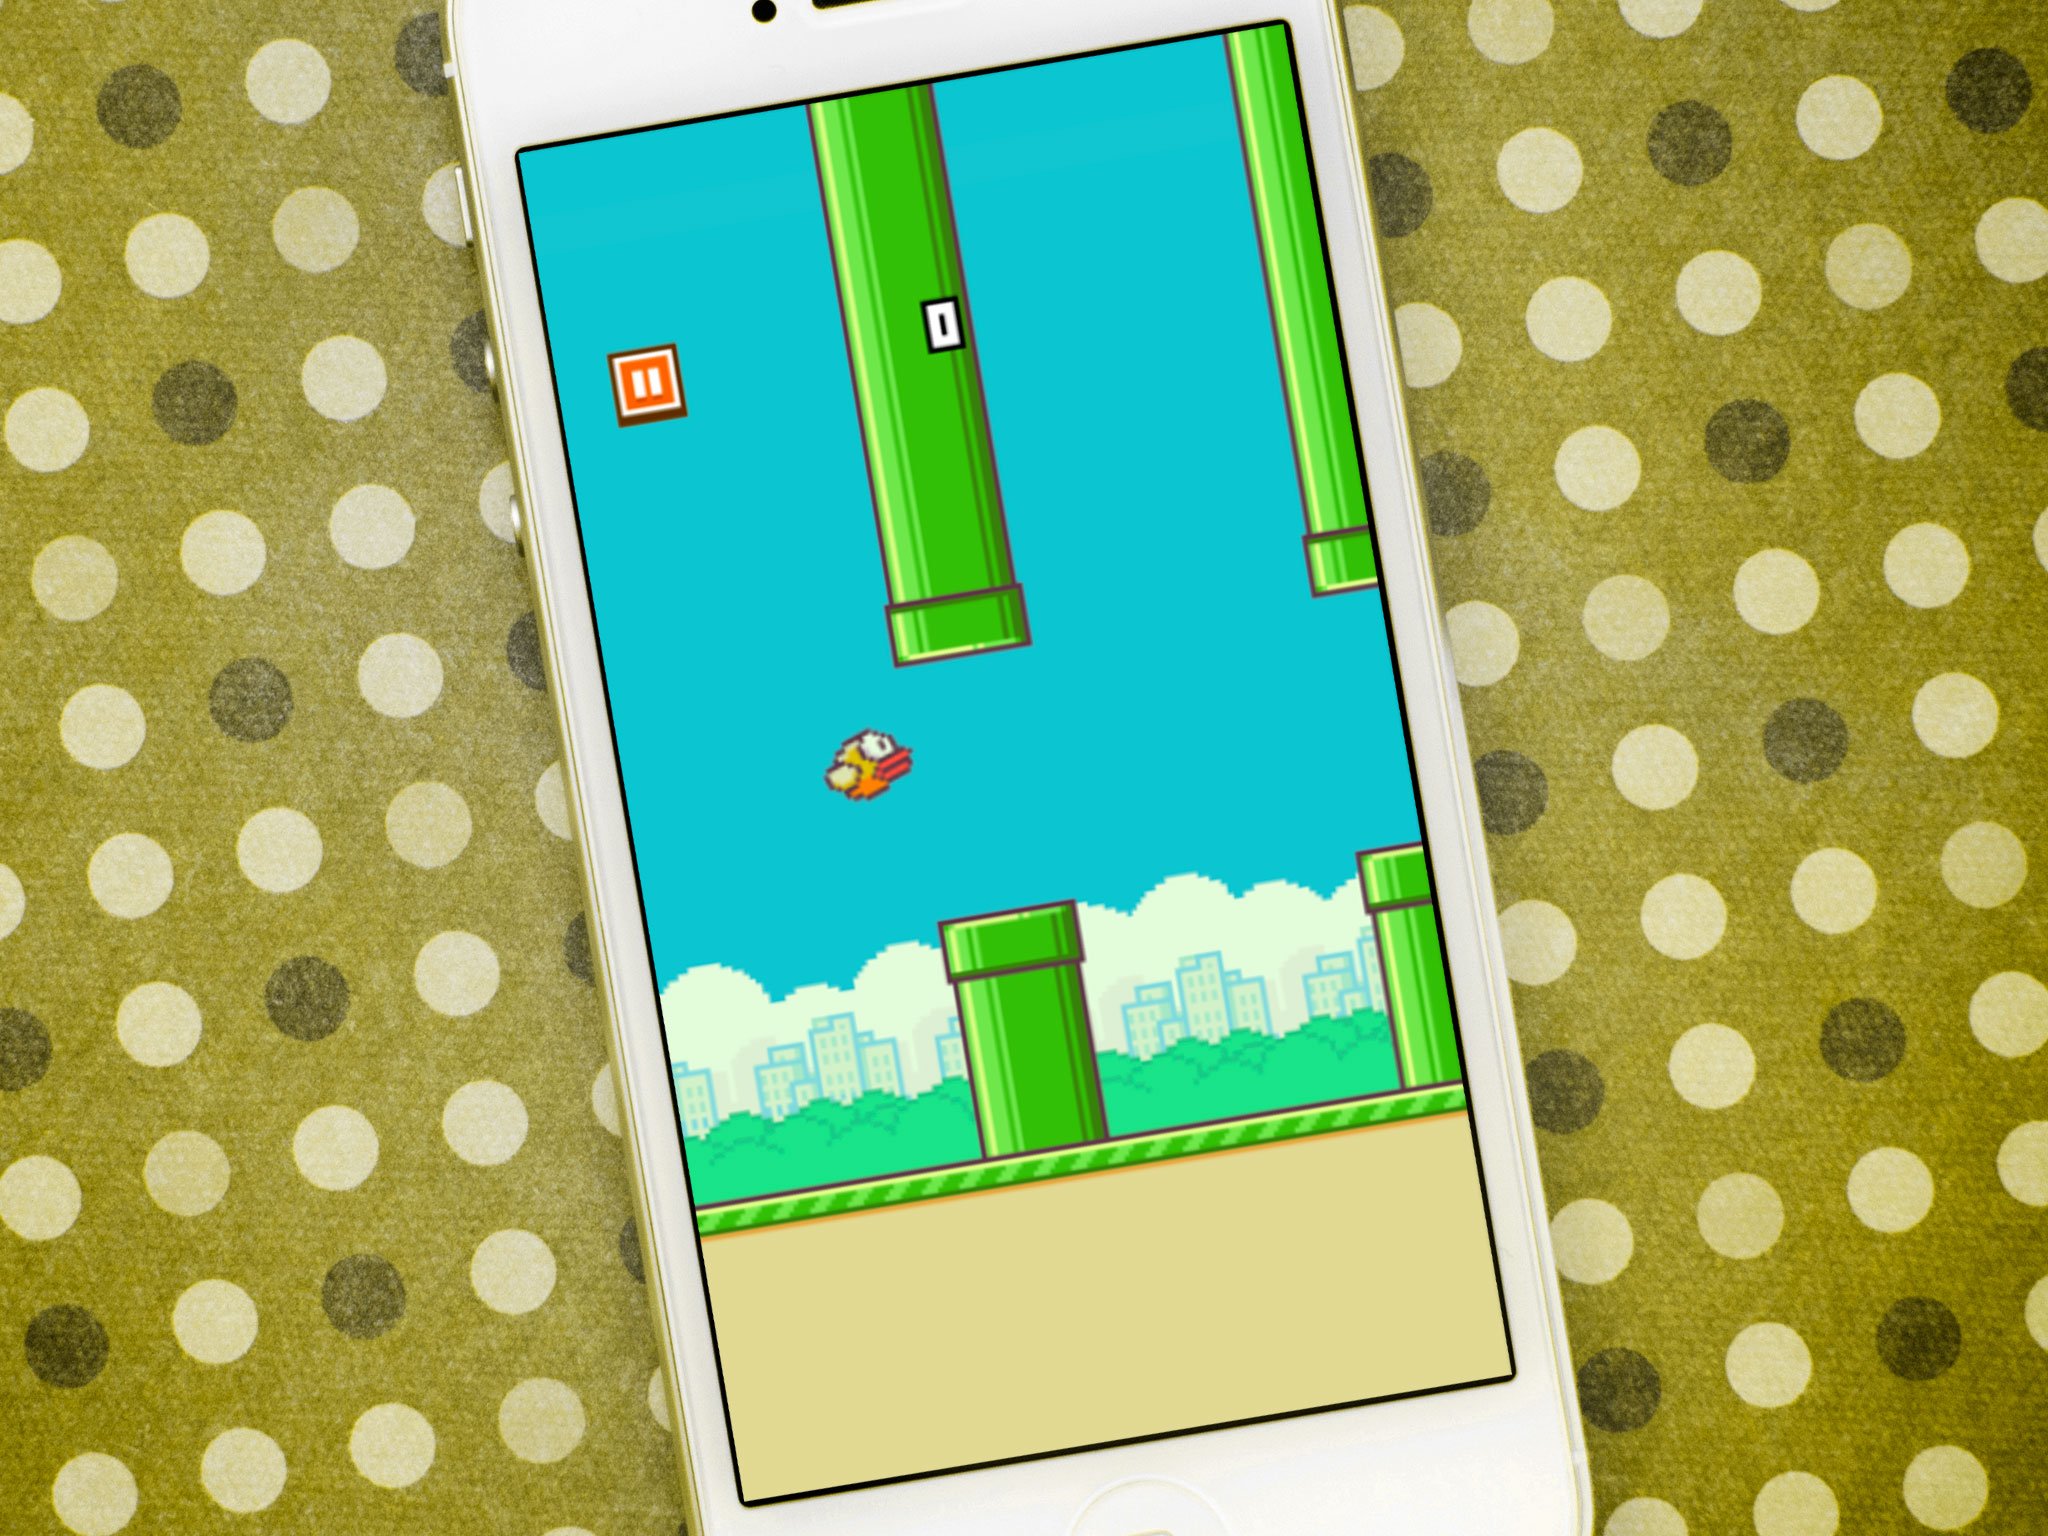 3 Apps that are Worse than Flappy Bird